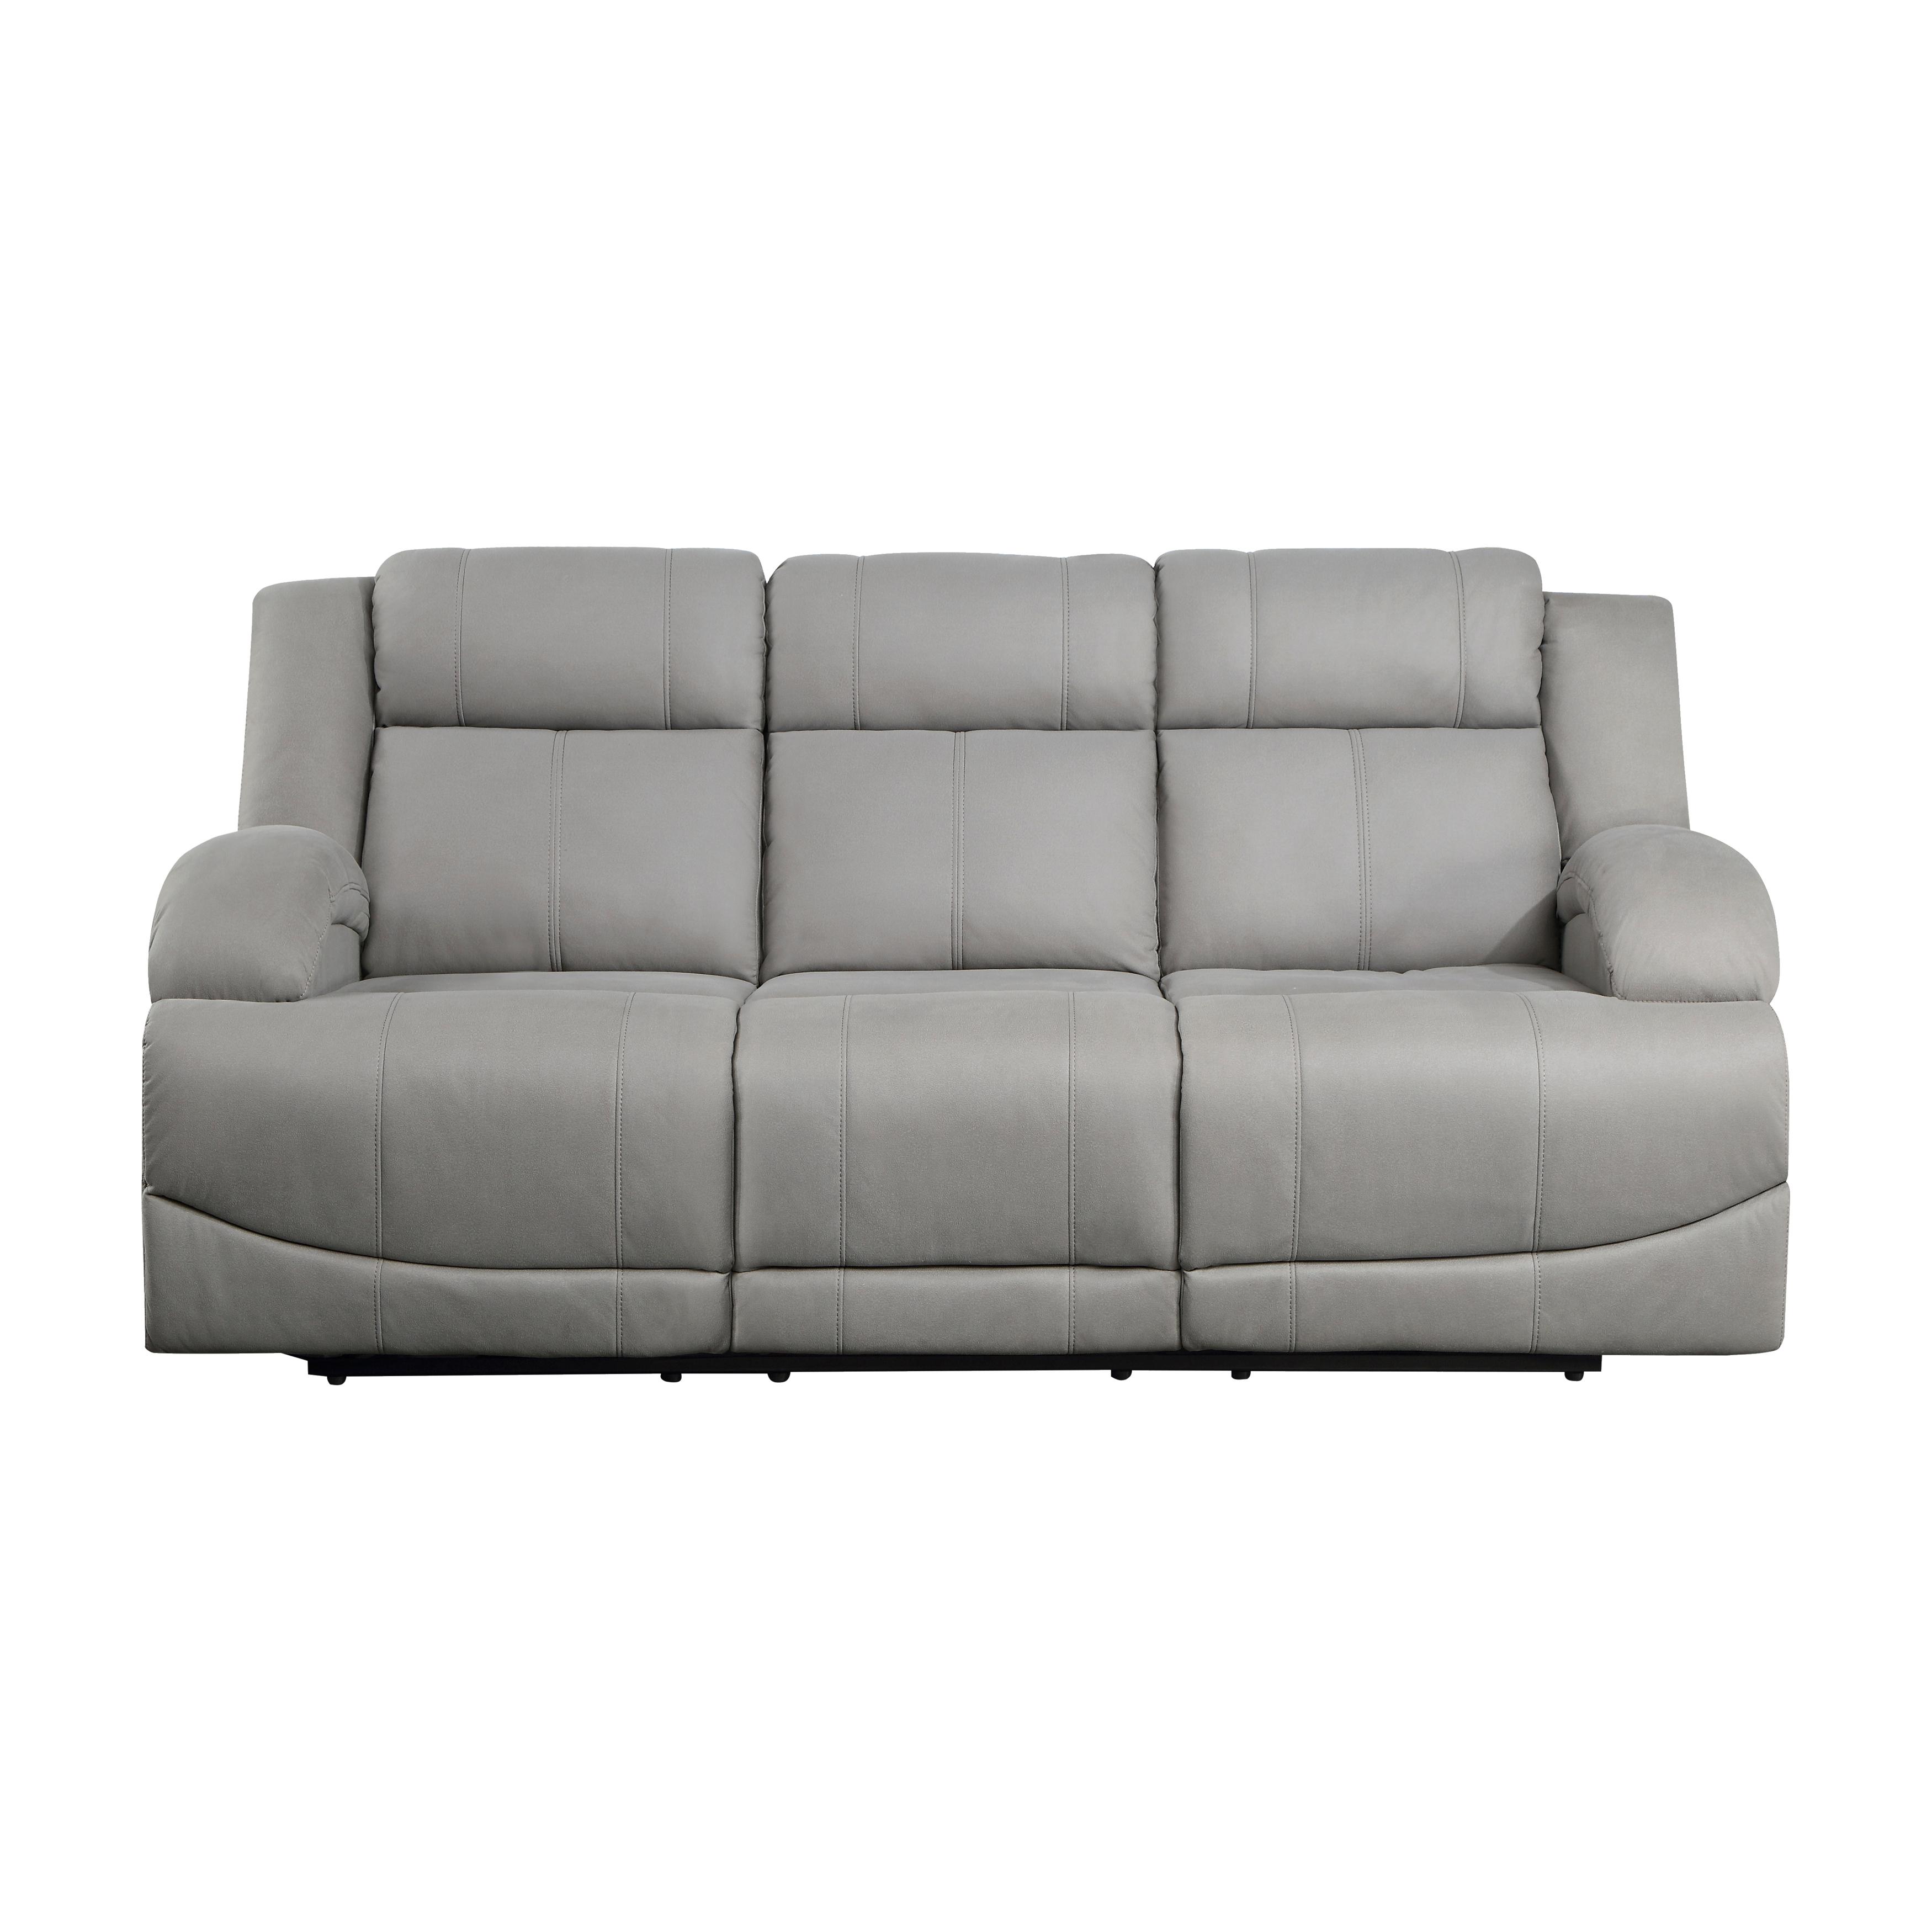 Transitional Power Reclining Sofa 9207GRY-3PW Camryn 9207GRY-3PW in Gray Microfiber